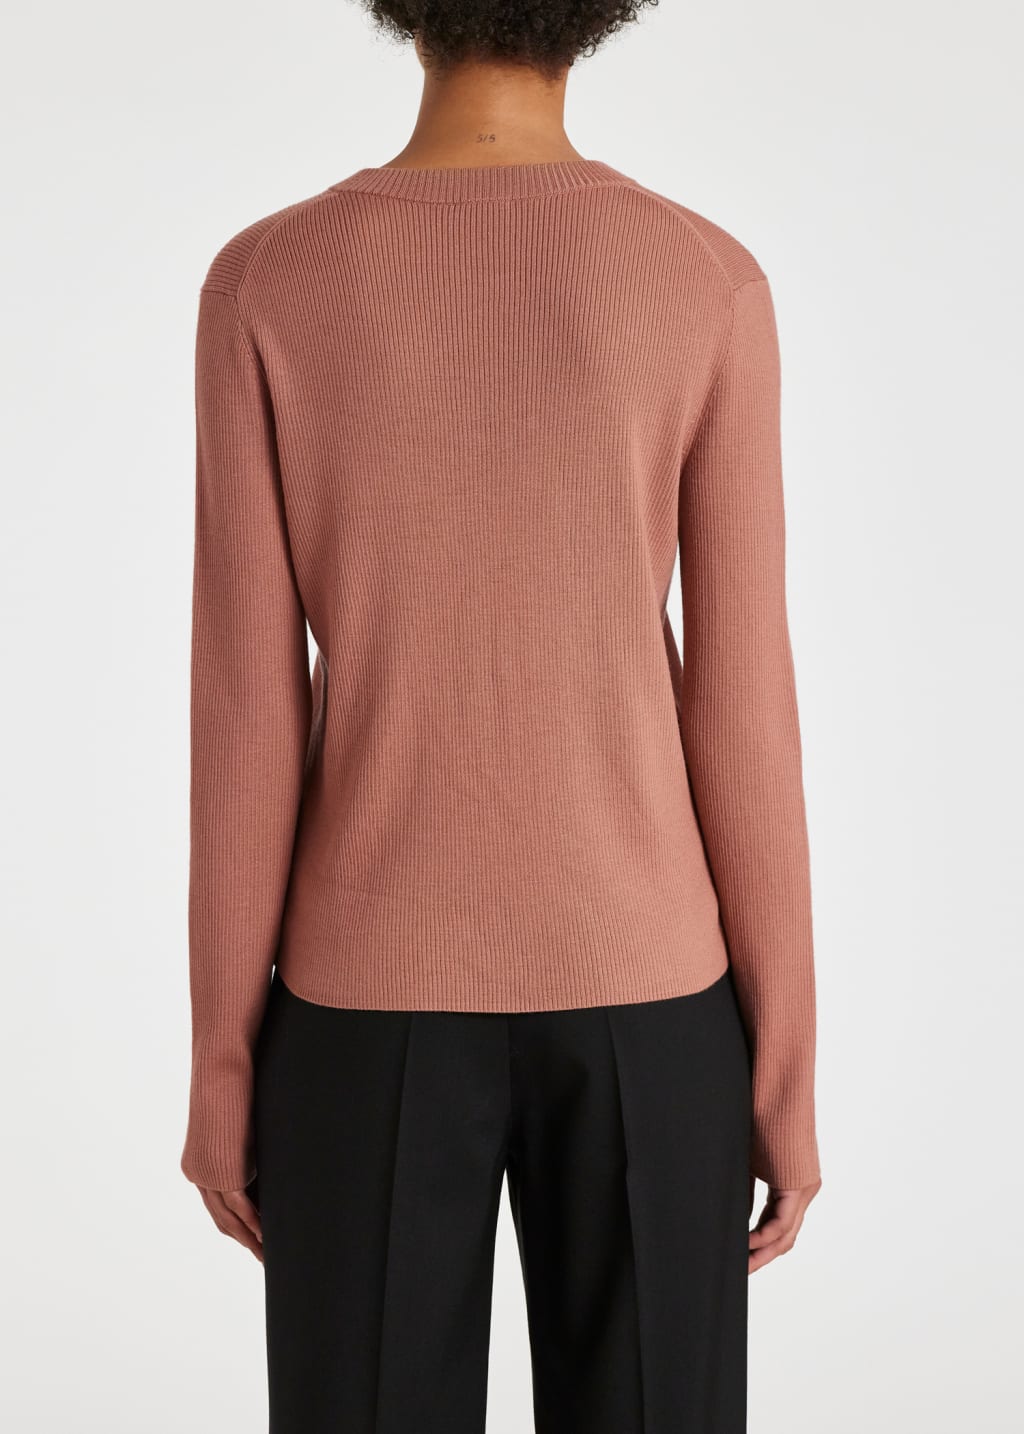 Model View - Women's Warm Nude Ribbed Cardigan Paul Smith